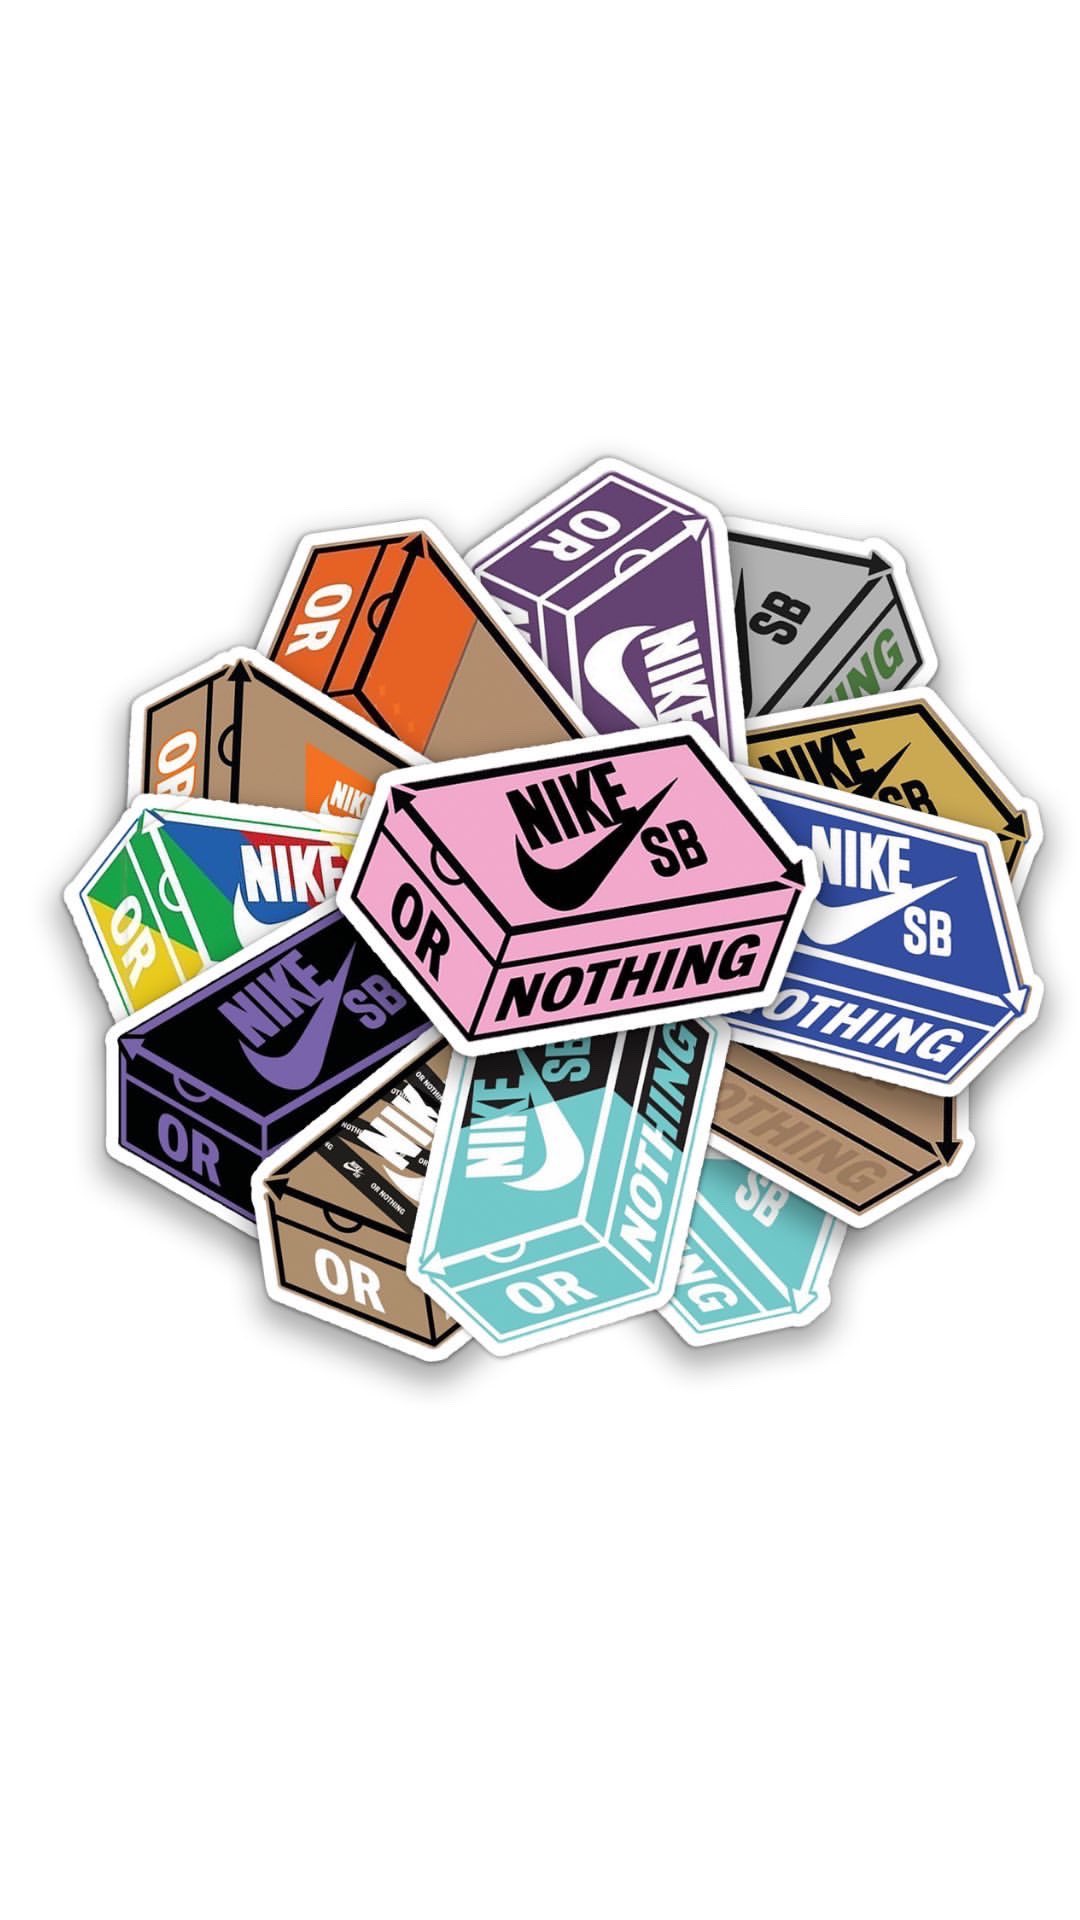 Nike SB News and Info Twitter: "Logo stickers available now at https://t.co/7qlzBisMQO https://t.co/Xopisze3AR" /